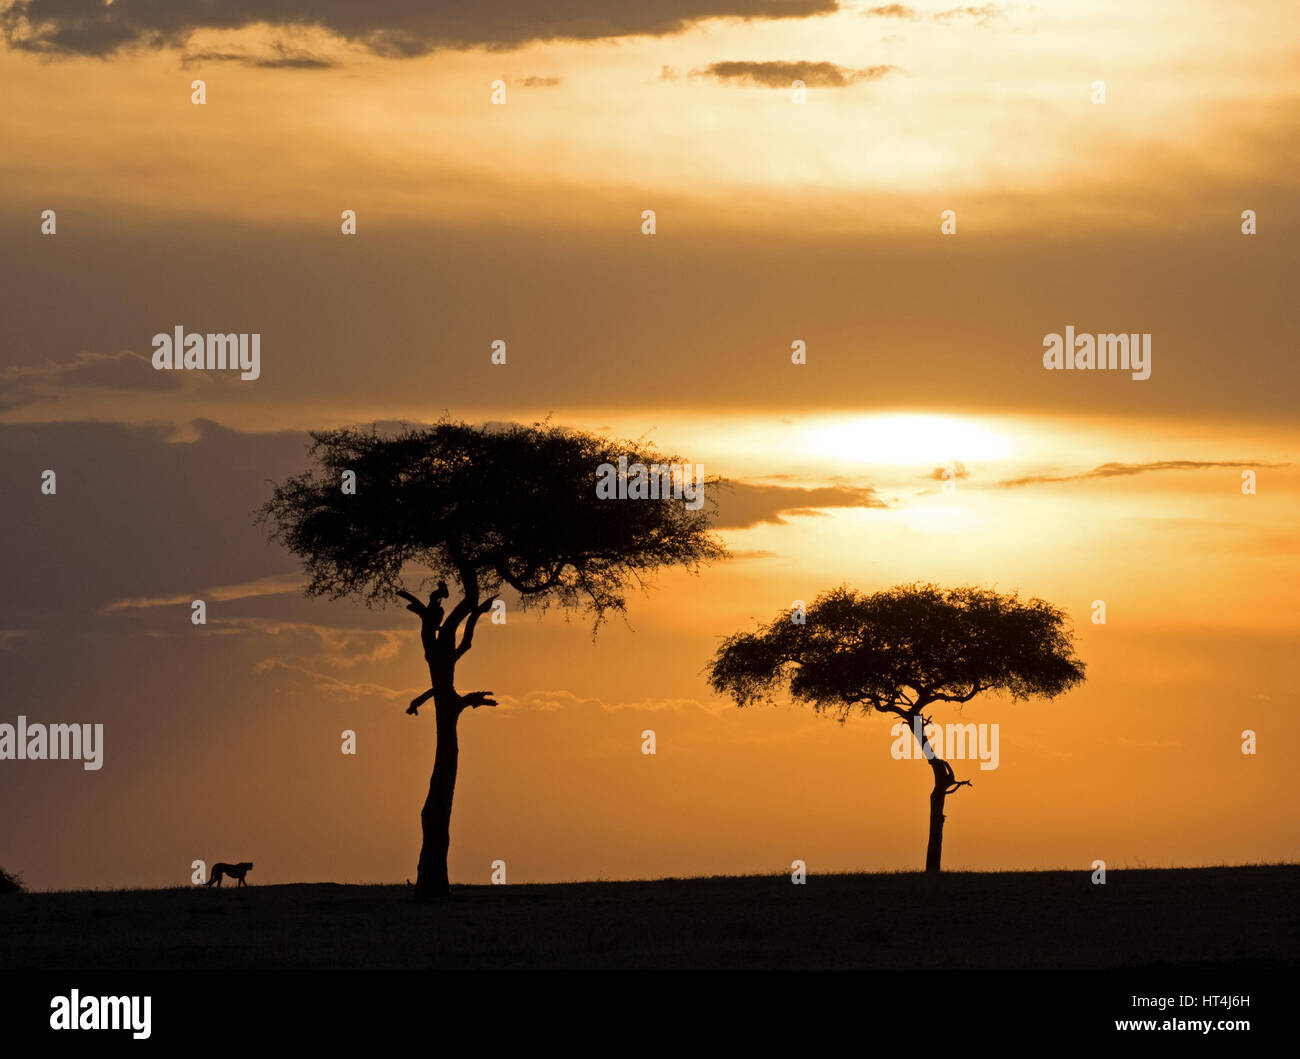 iconic outline of adult Cheetah (Acinonyx jubatus) walking on skyline with trees silhouetted by golden sunset in the Mara Conservancies, Kenya Africa Stock Photo